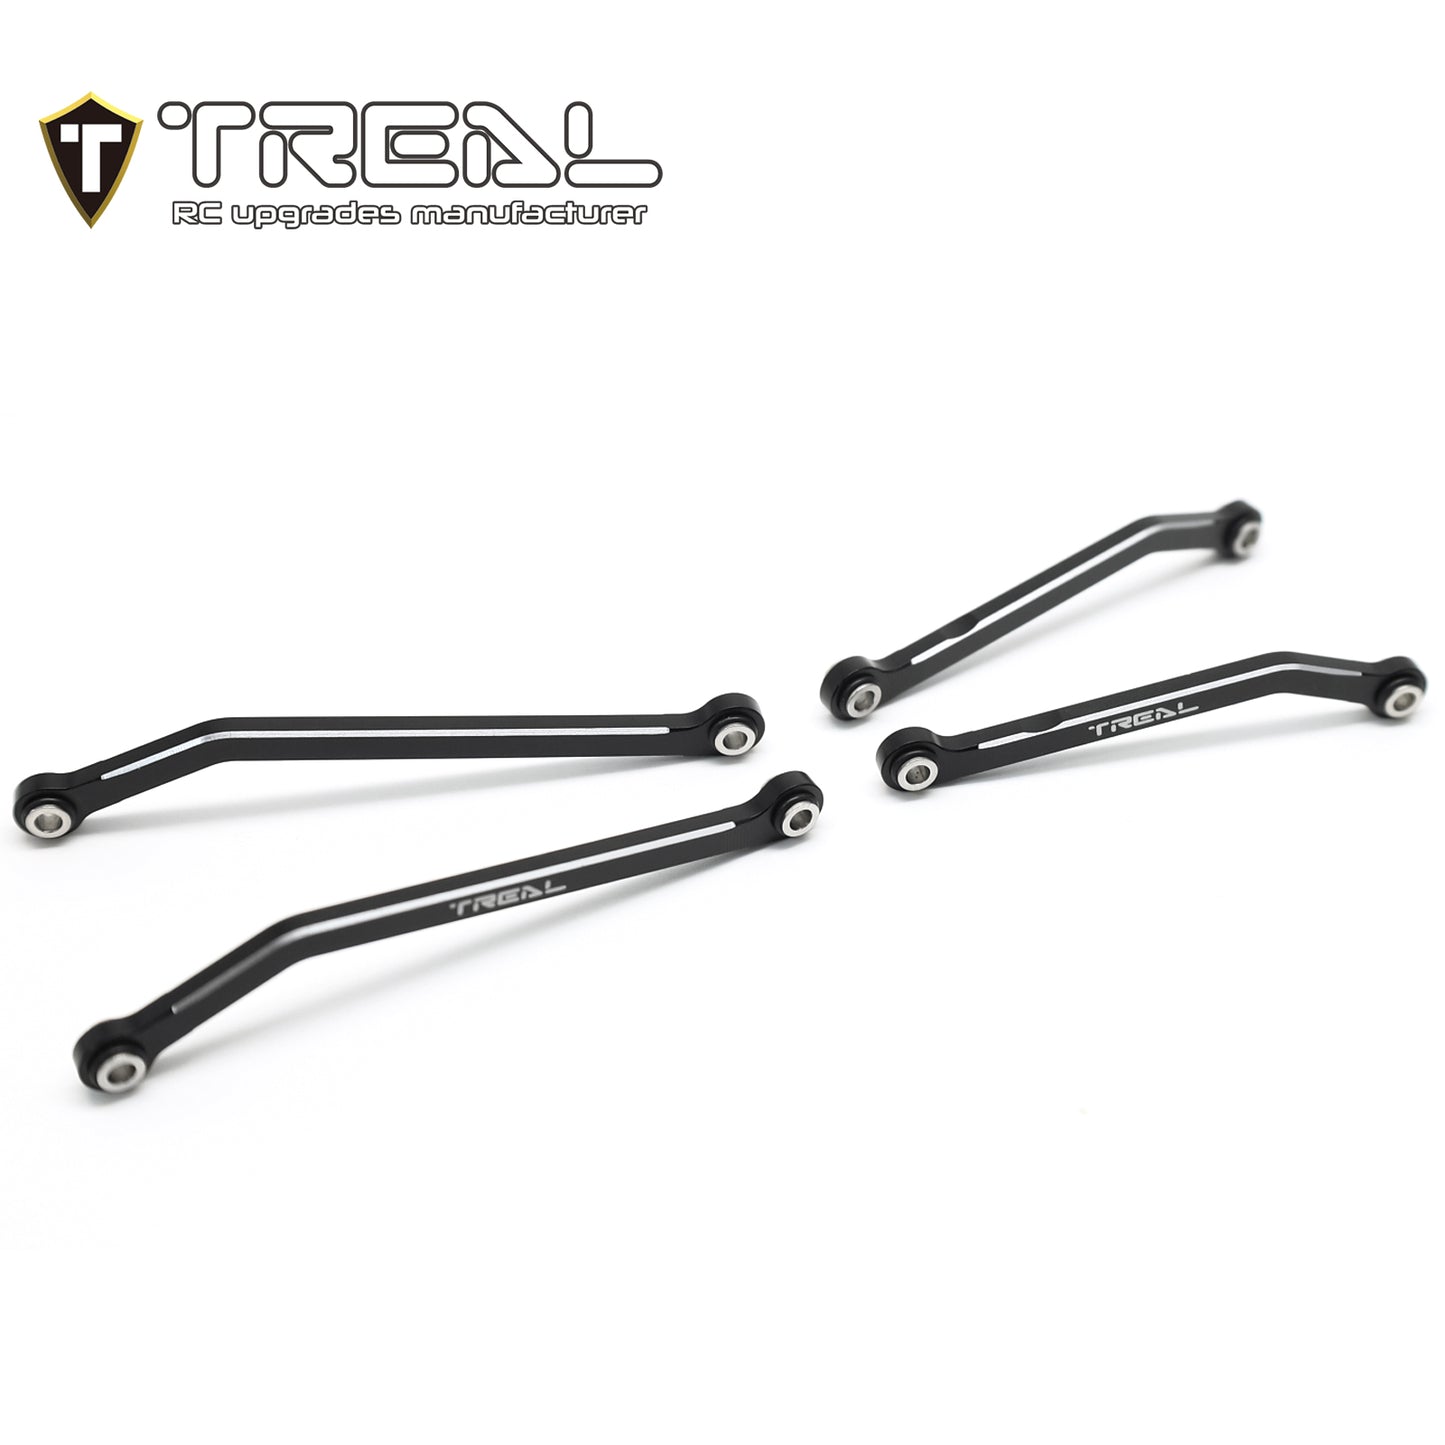 TREAL Aluminum 7075 High Clearance Links Set (4pcs) Chassis Lower Links for TRX4M 1/18 RC Crawler